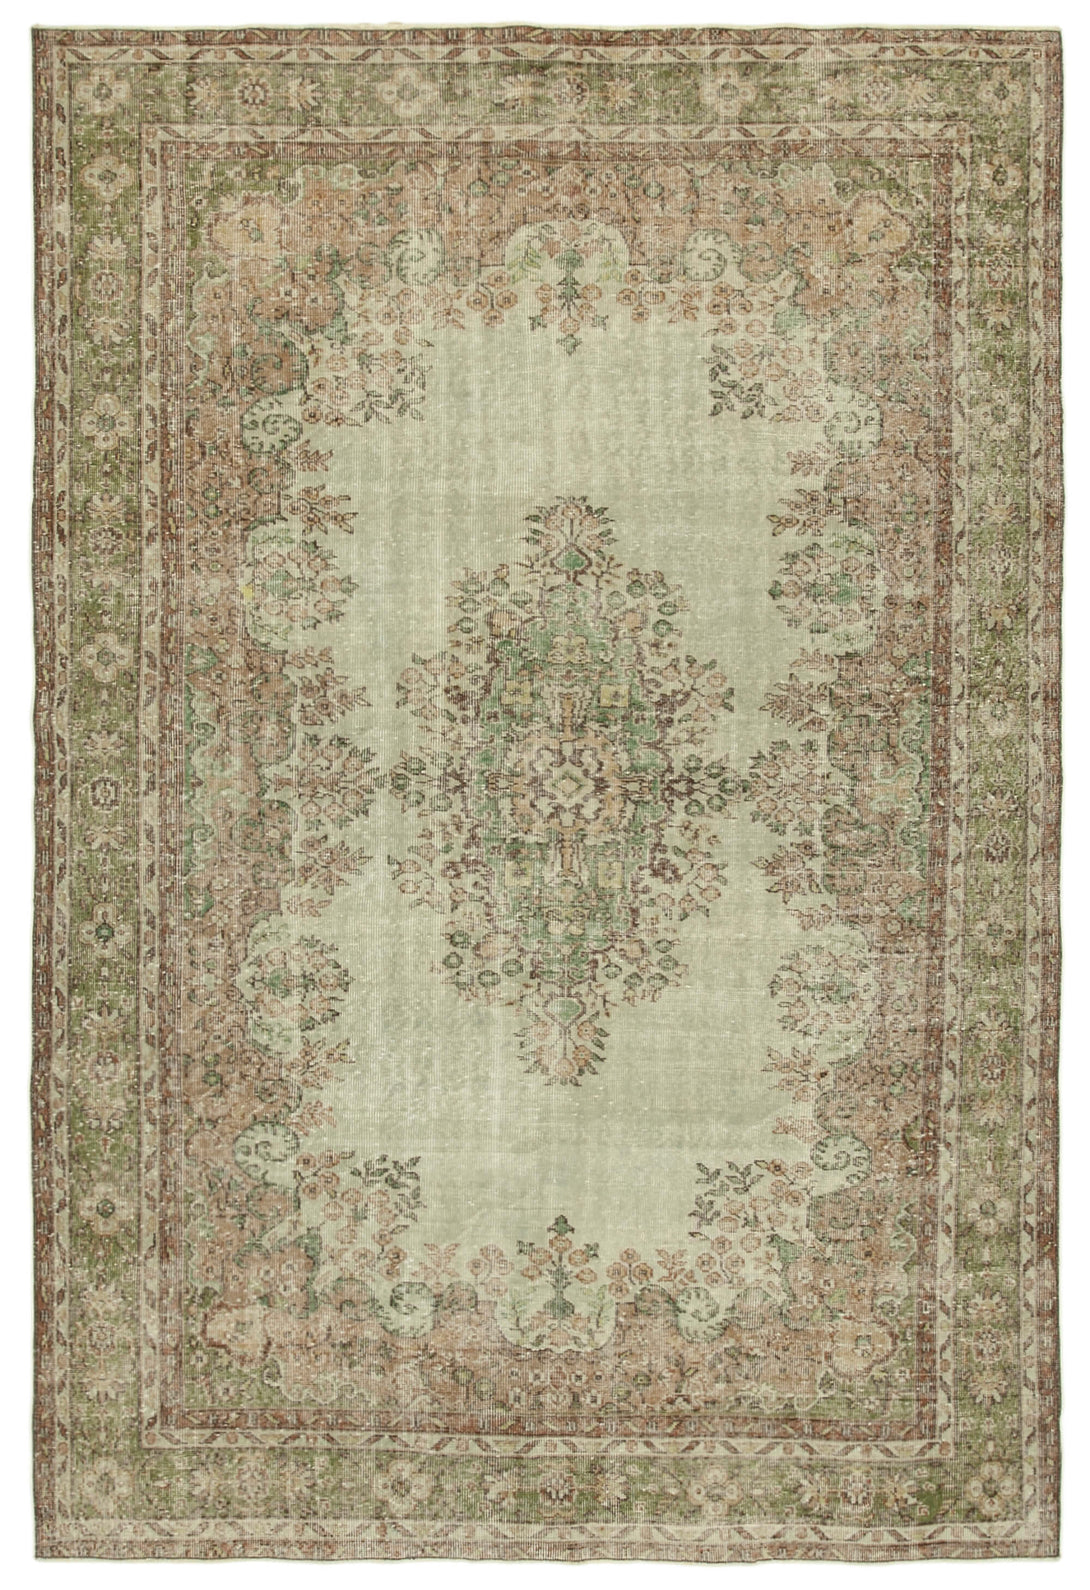 Handmade White Wash Area Rug > Design# OL-AC-38794 > Size: 7'-0" x 10'-4", Carpet Culture Rugs, Handmade Rugs, NYC Rugs, New Rugs, Shop Rugs, Rug Store, Outlet Rugs, SoHo Rugs, Rugs in USA